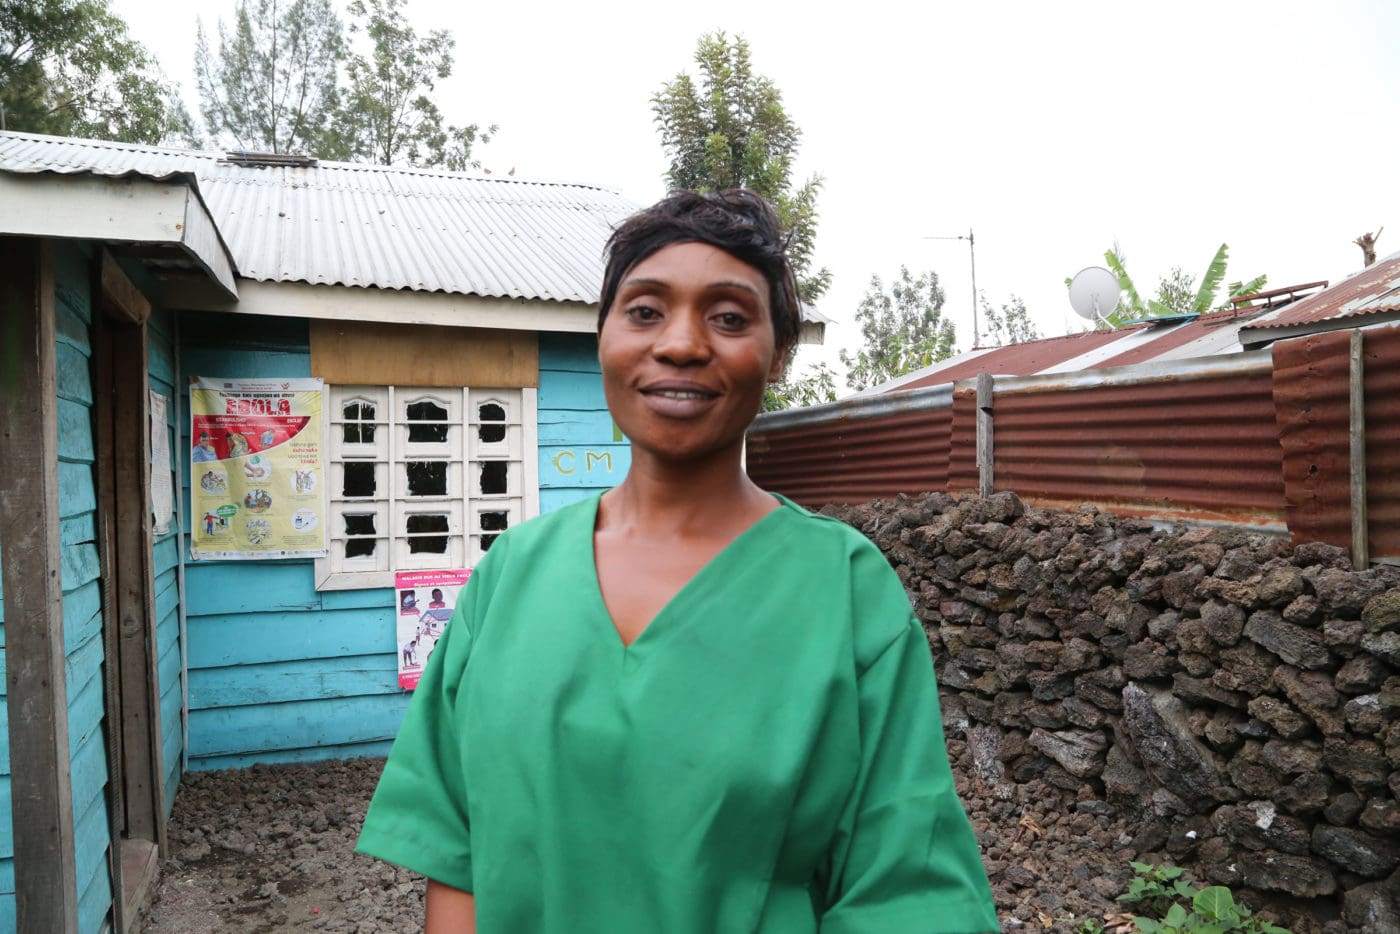 A nurse in green scrubs is pictured standing outside her house, smiling